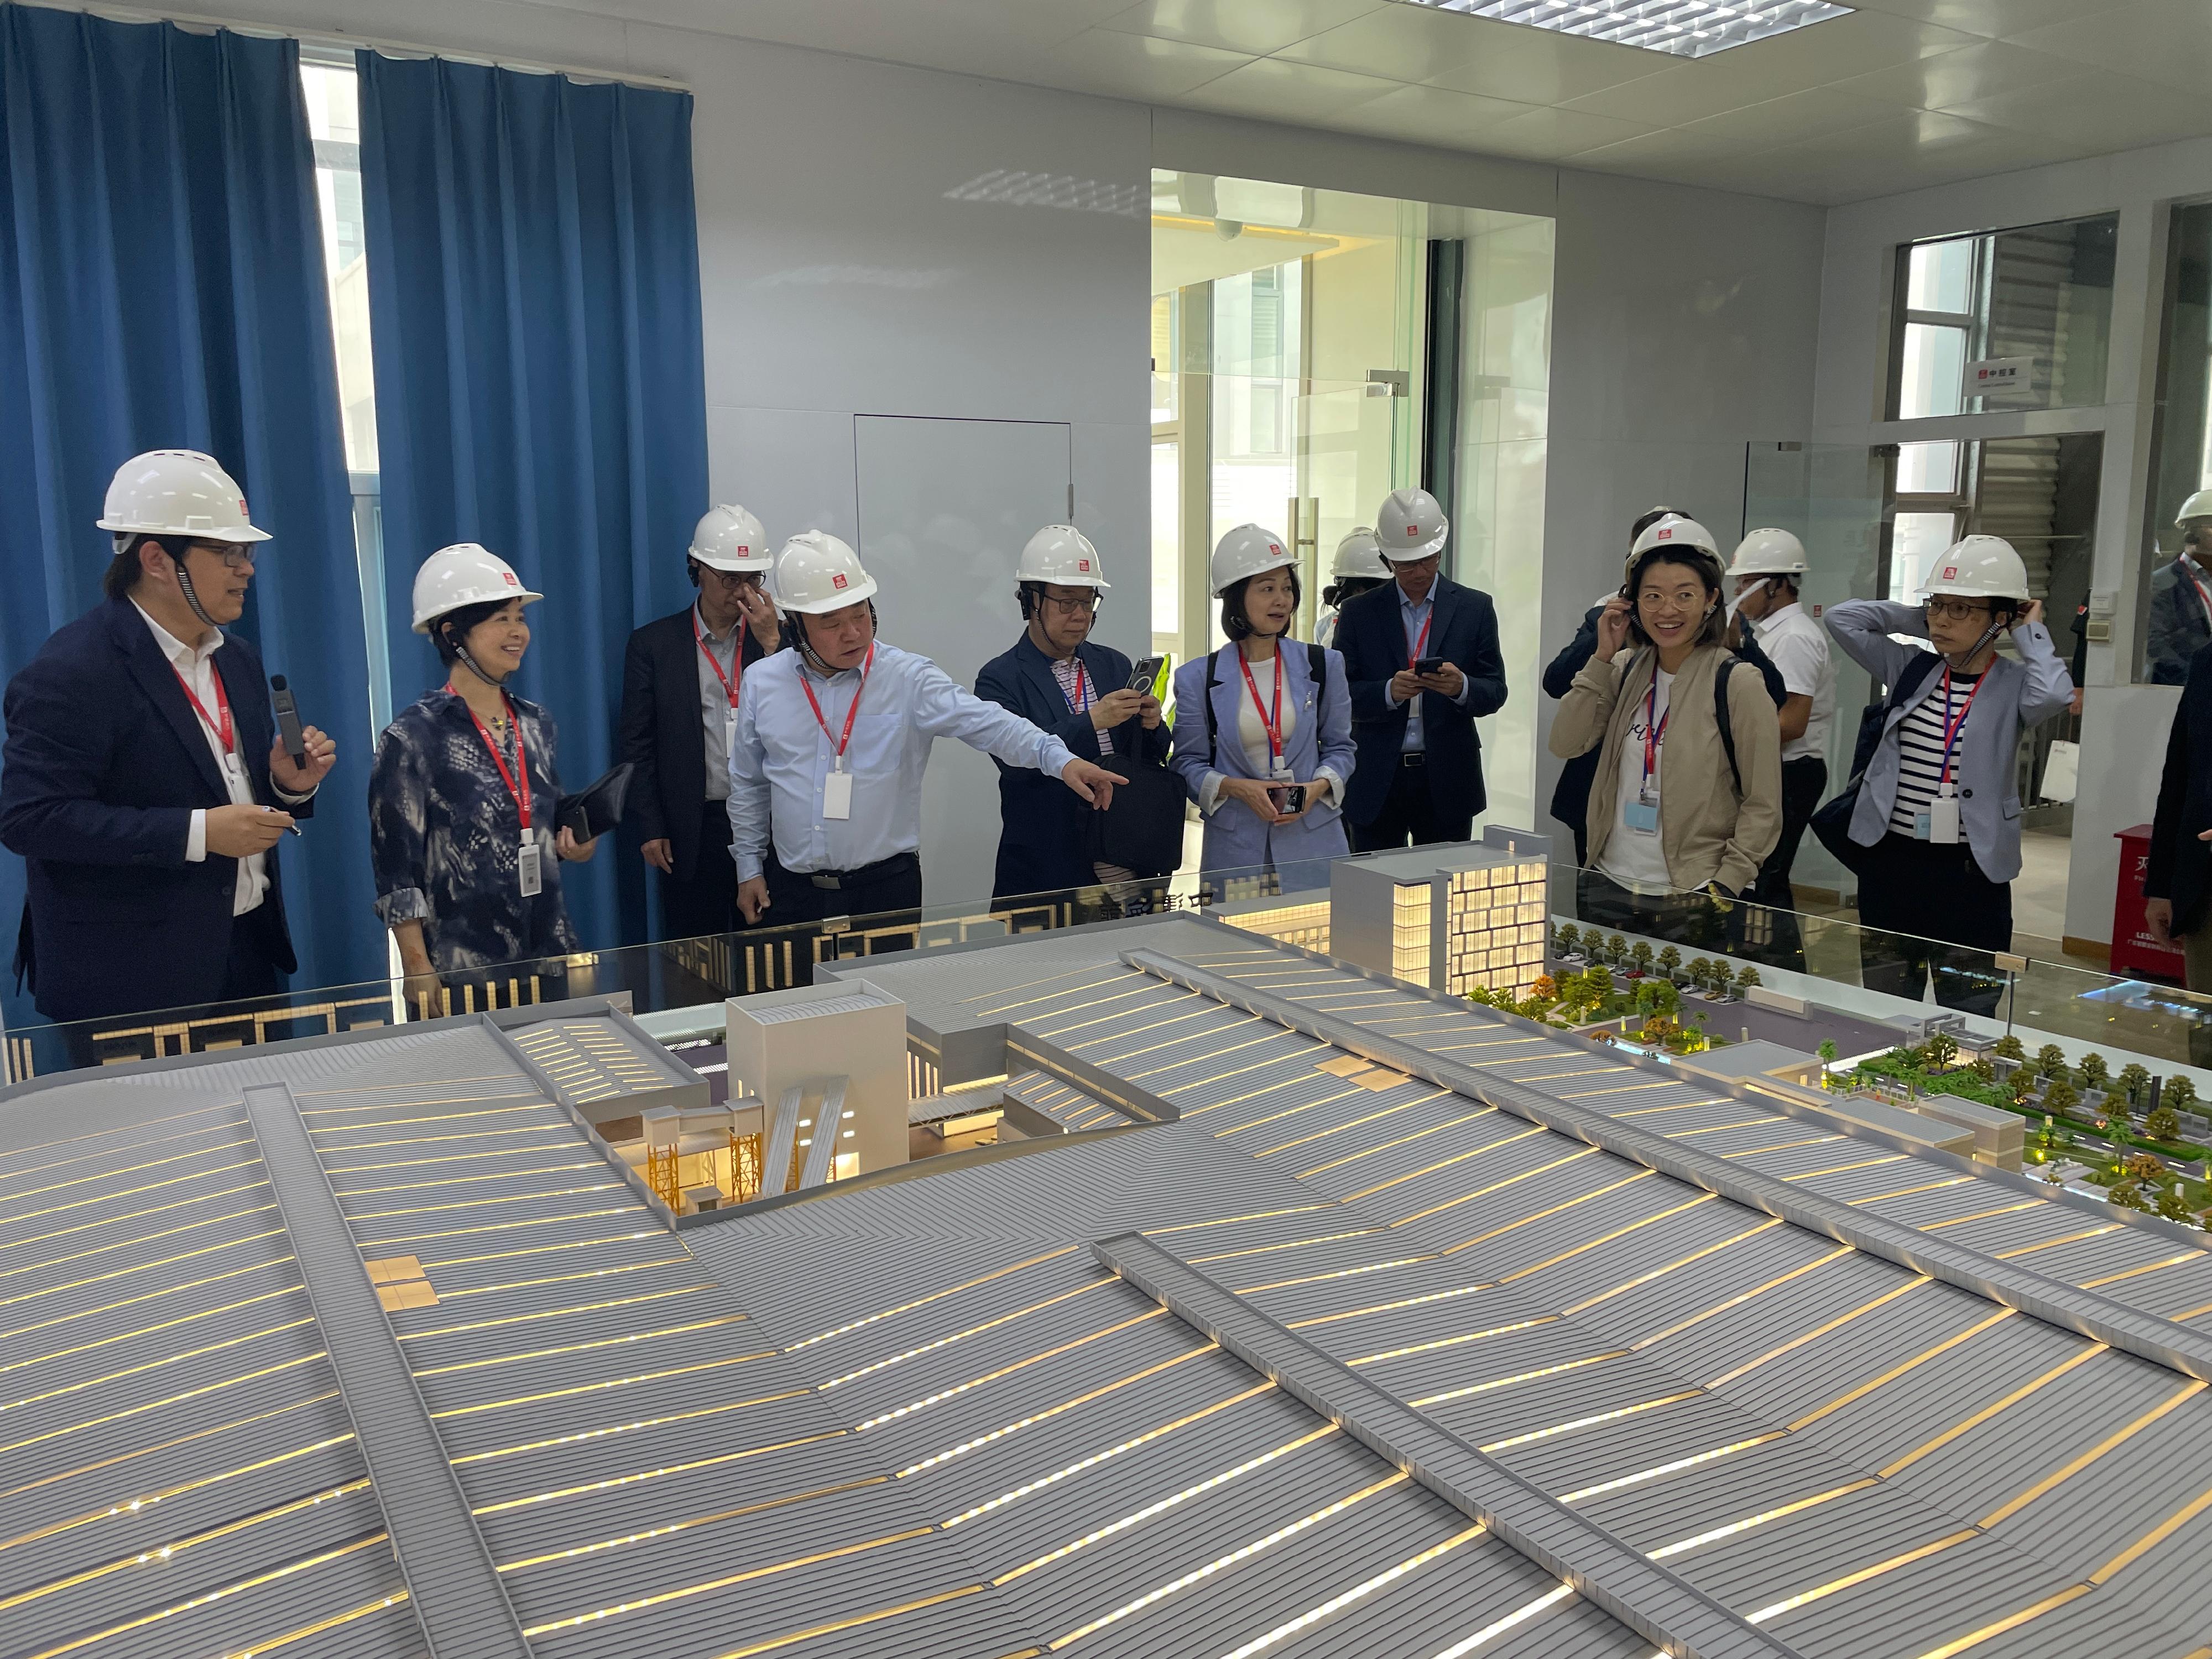 The Secretary for Housing and Chairman of the Hong Kong Housing Authority (HA), Ms Winnie Ho, and members of the HA Building Committee and Tender Committee, visited Foshan and Zhuhai today (July 19) to get an understanding of the latest situation regarding research and development and applications of innovative construction technologies in the Guangdong-Hong Kong-Macao Greater Bay Area cities. Photo shows Ms Ho (second left) and the Chairman of the Building Committee, Dr Johnnie Chan (fifth left), visiting the Guangdong Hailong Construction Technology Company Limited in Zhuhai.